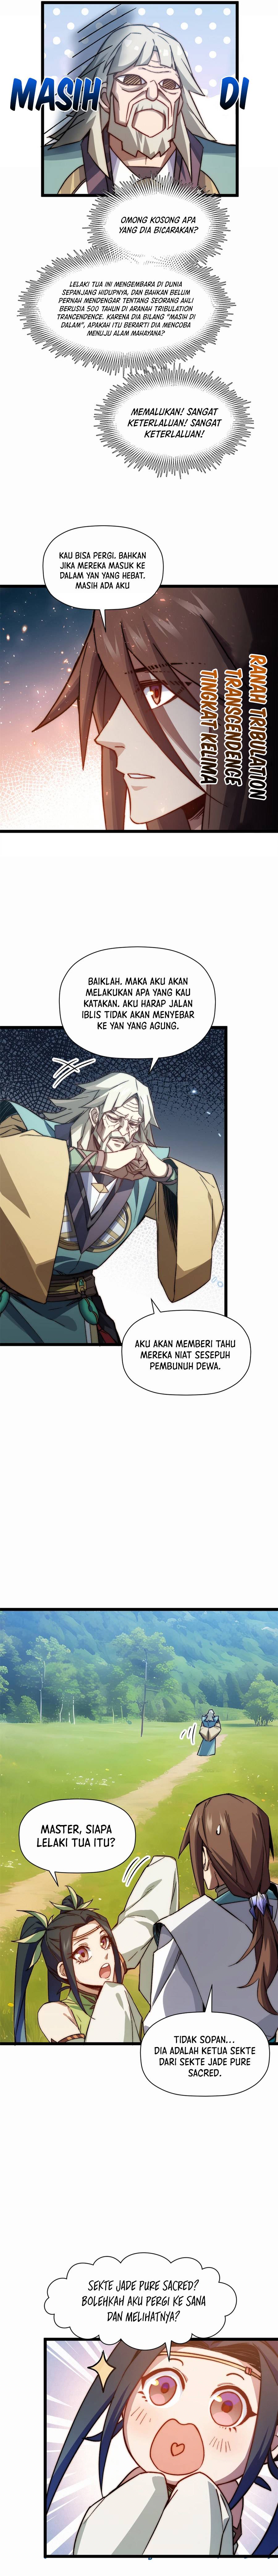 Dilarang COPAS - situs resmi www.mangacanblog.com - Komik top tier providence secretly cultivate for a thousand years 131 - chapter 131 132 Indonesia top tier providence secretly cultivate for a thousand years 131 - chapter 131 Terbaru 14|Baca Manga Komik Indonesia|Mangacan